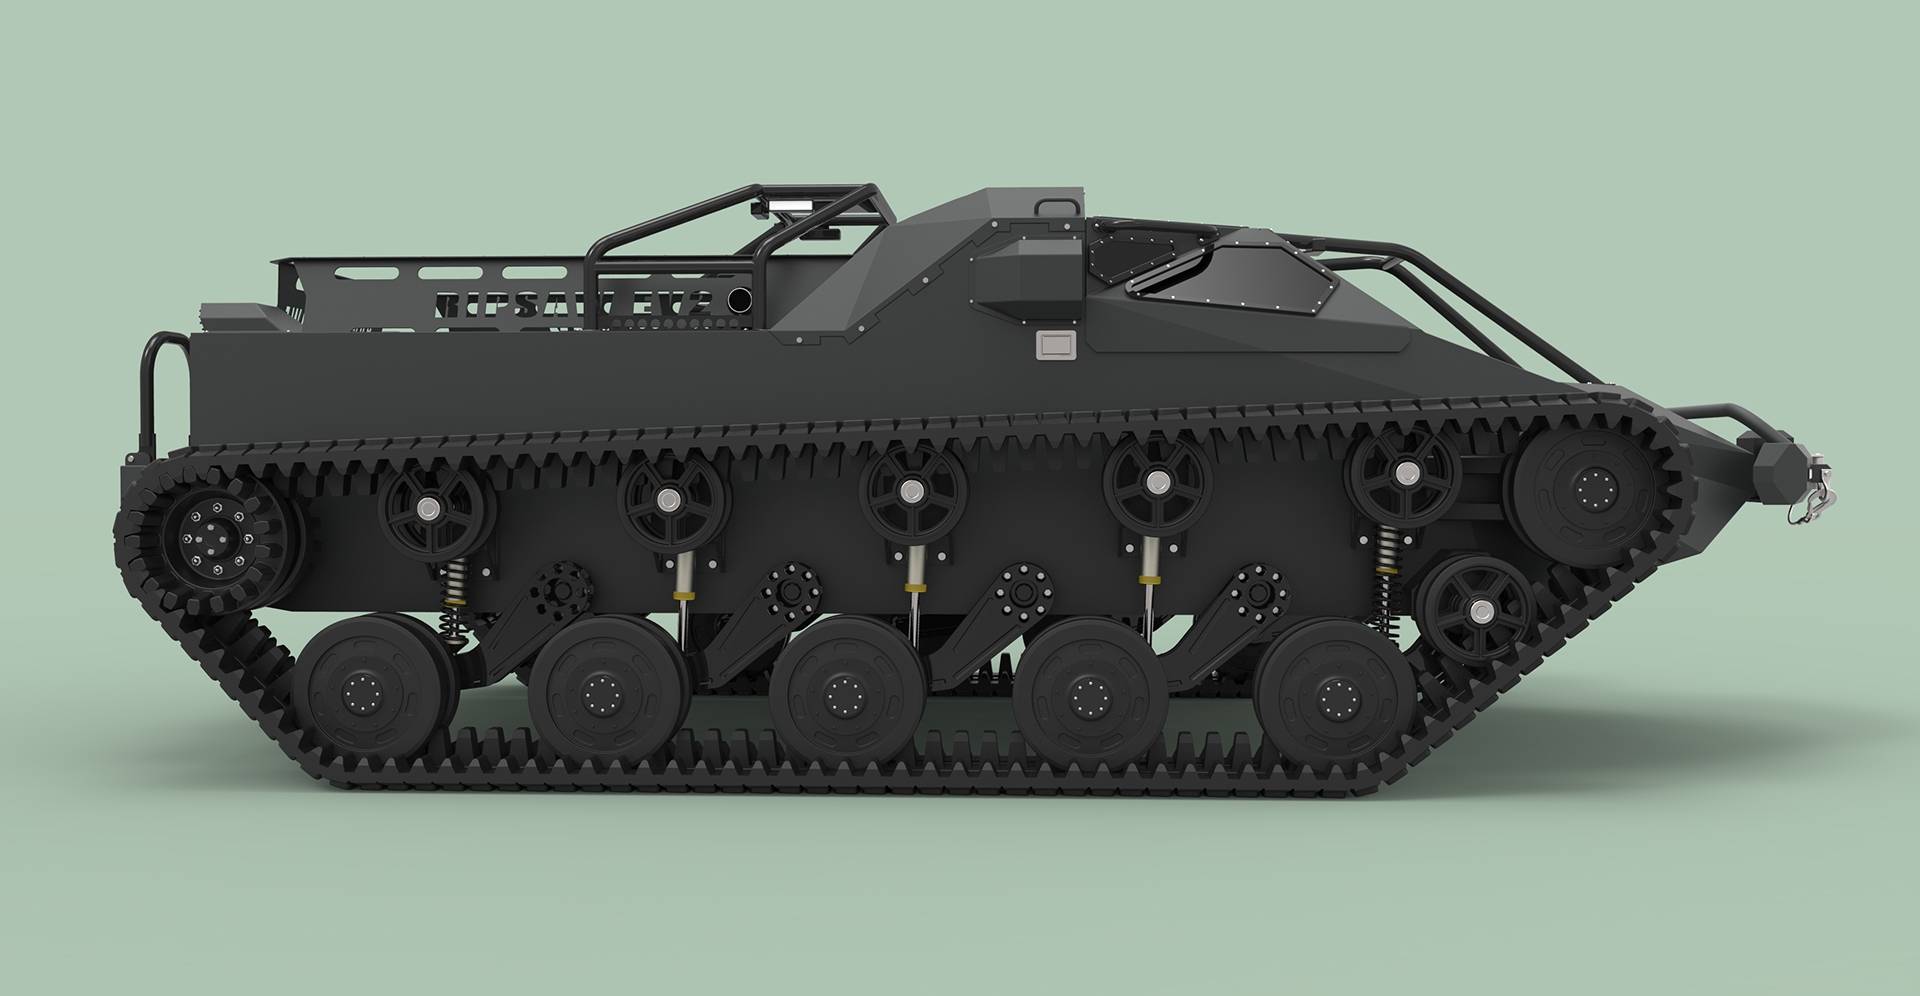 Howe & howe ripsaw: a next-generation remote-controlled tank